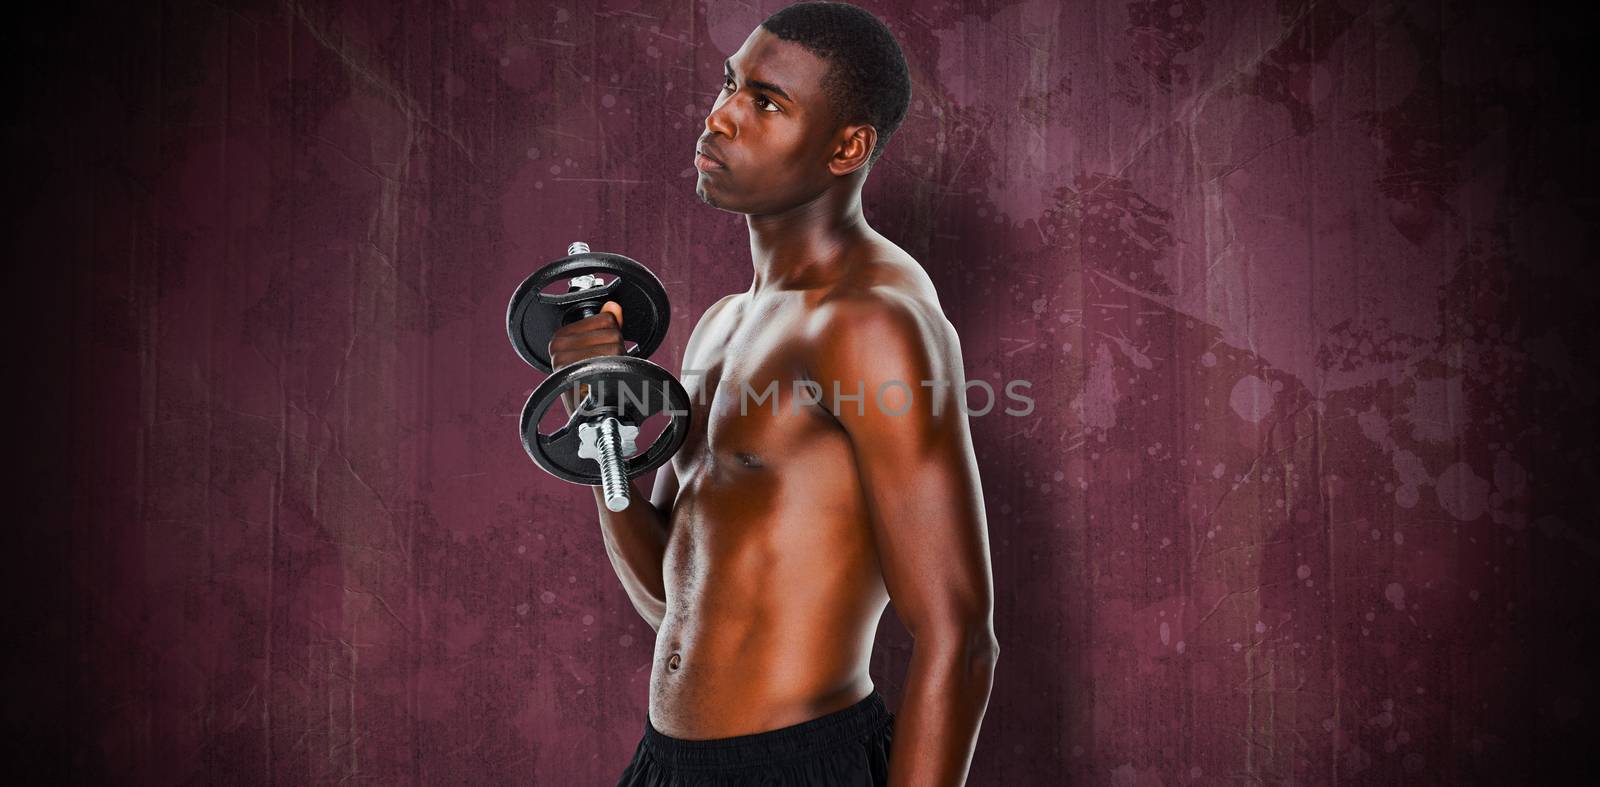 Serious fit shirtless young man lifting dumbbell against red paint splashed surface